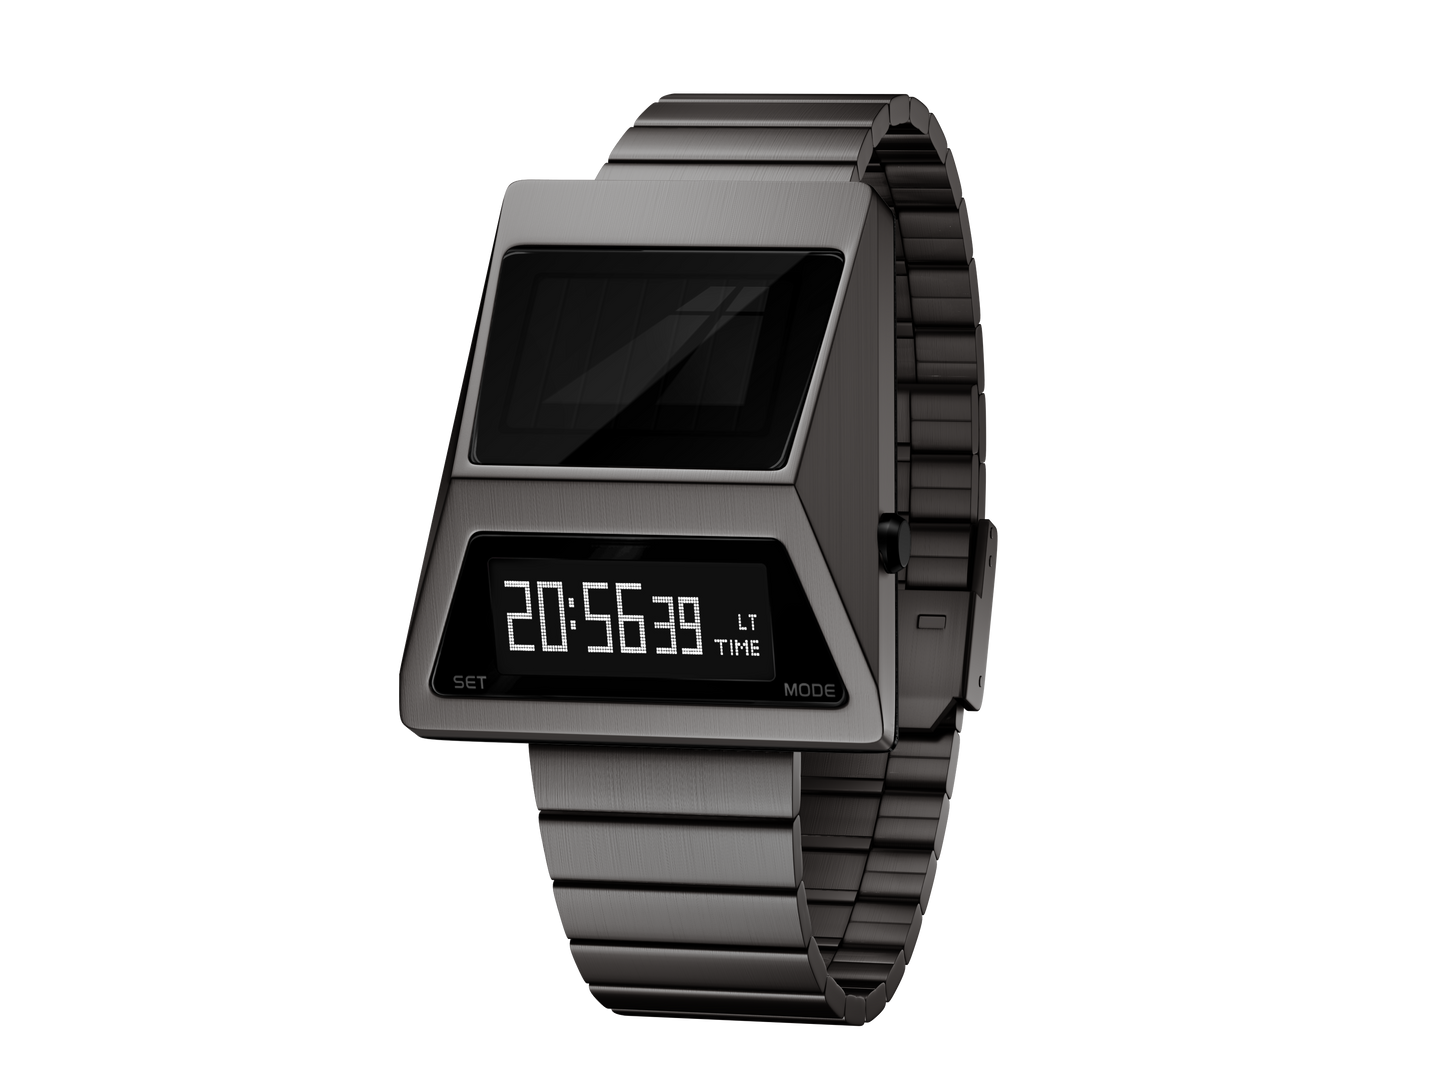 solar-powered-cyber-watches-s3000Ga-W-front view